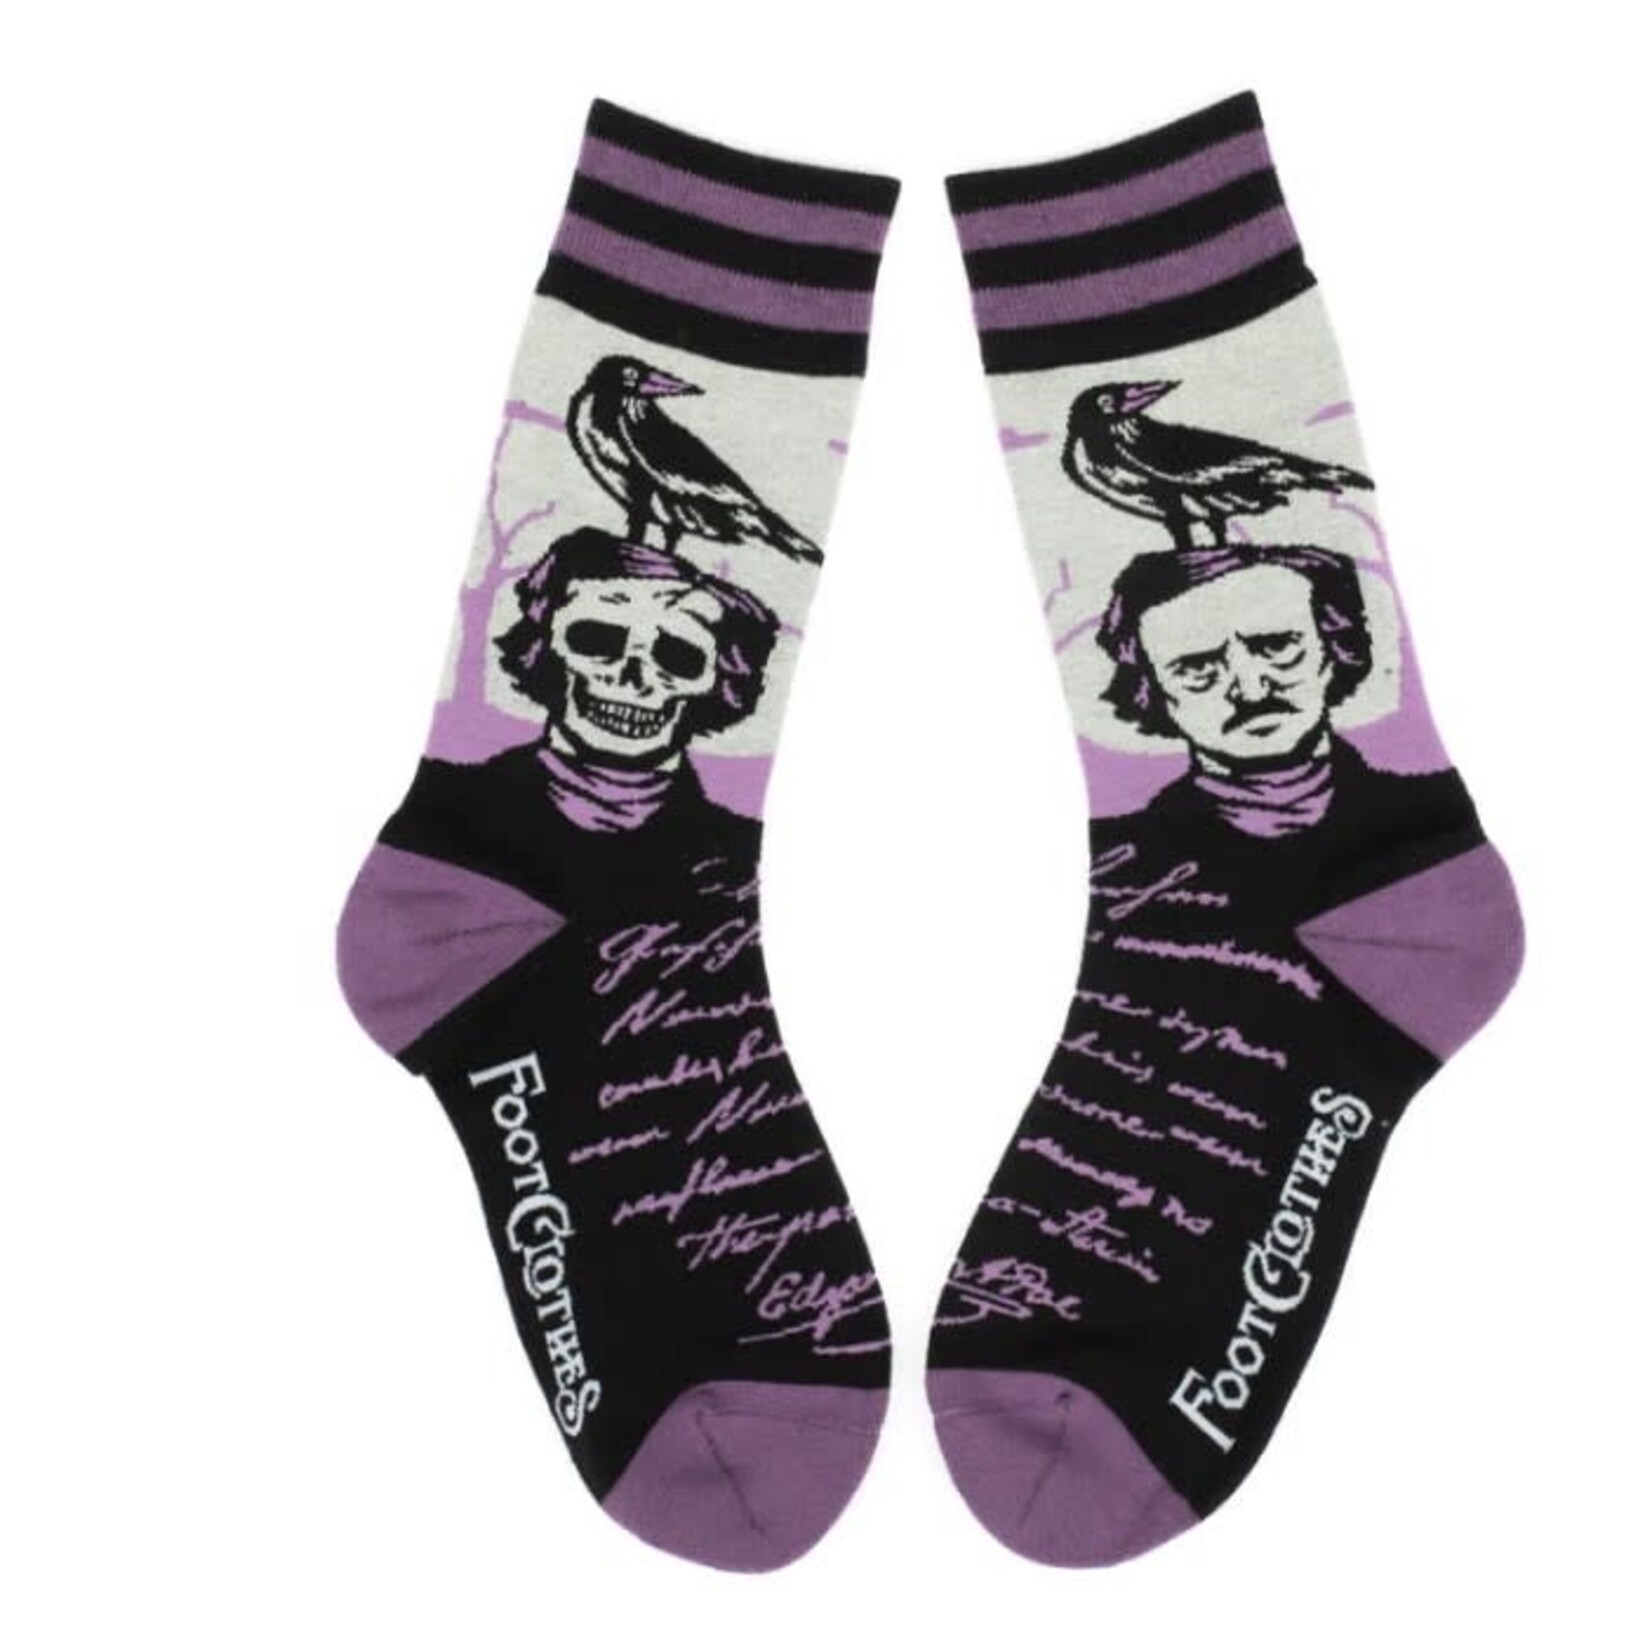 FootClothes The Raven Crew Socks with Split Left/Right Design